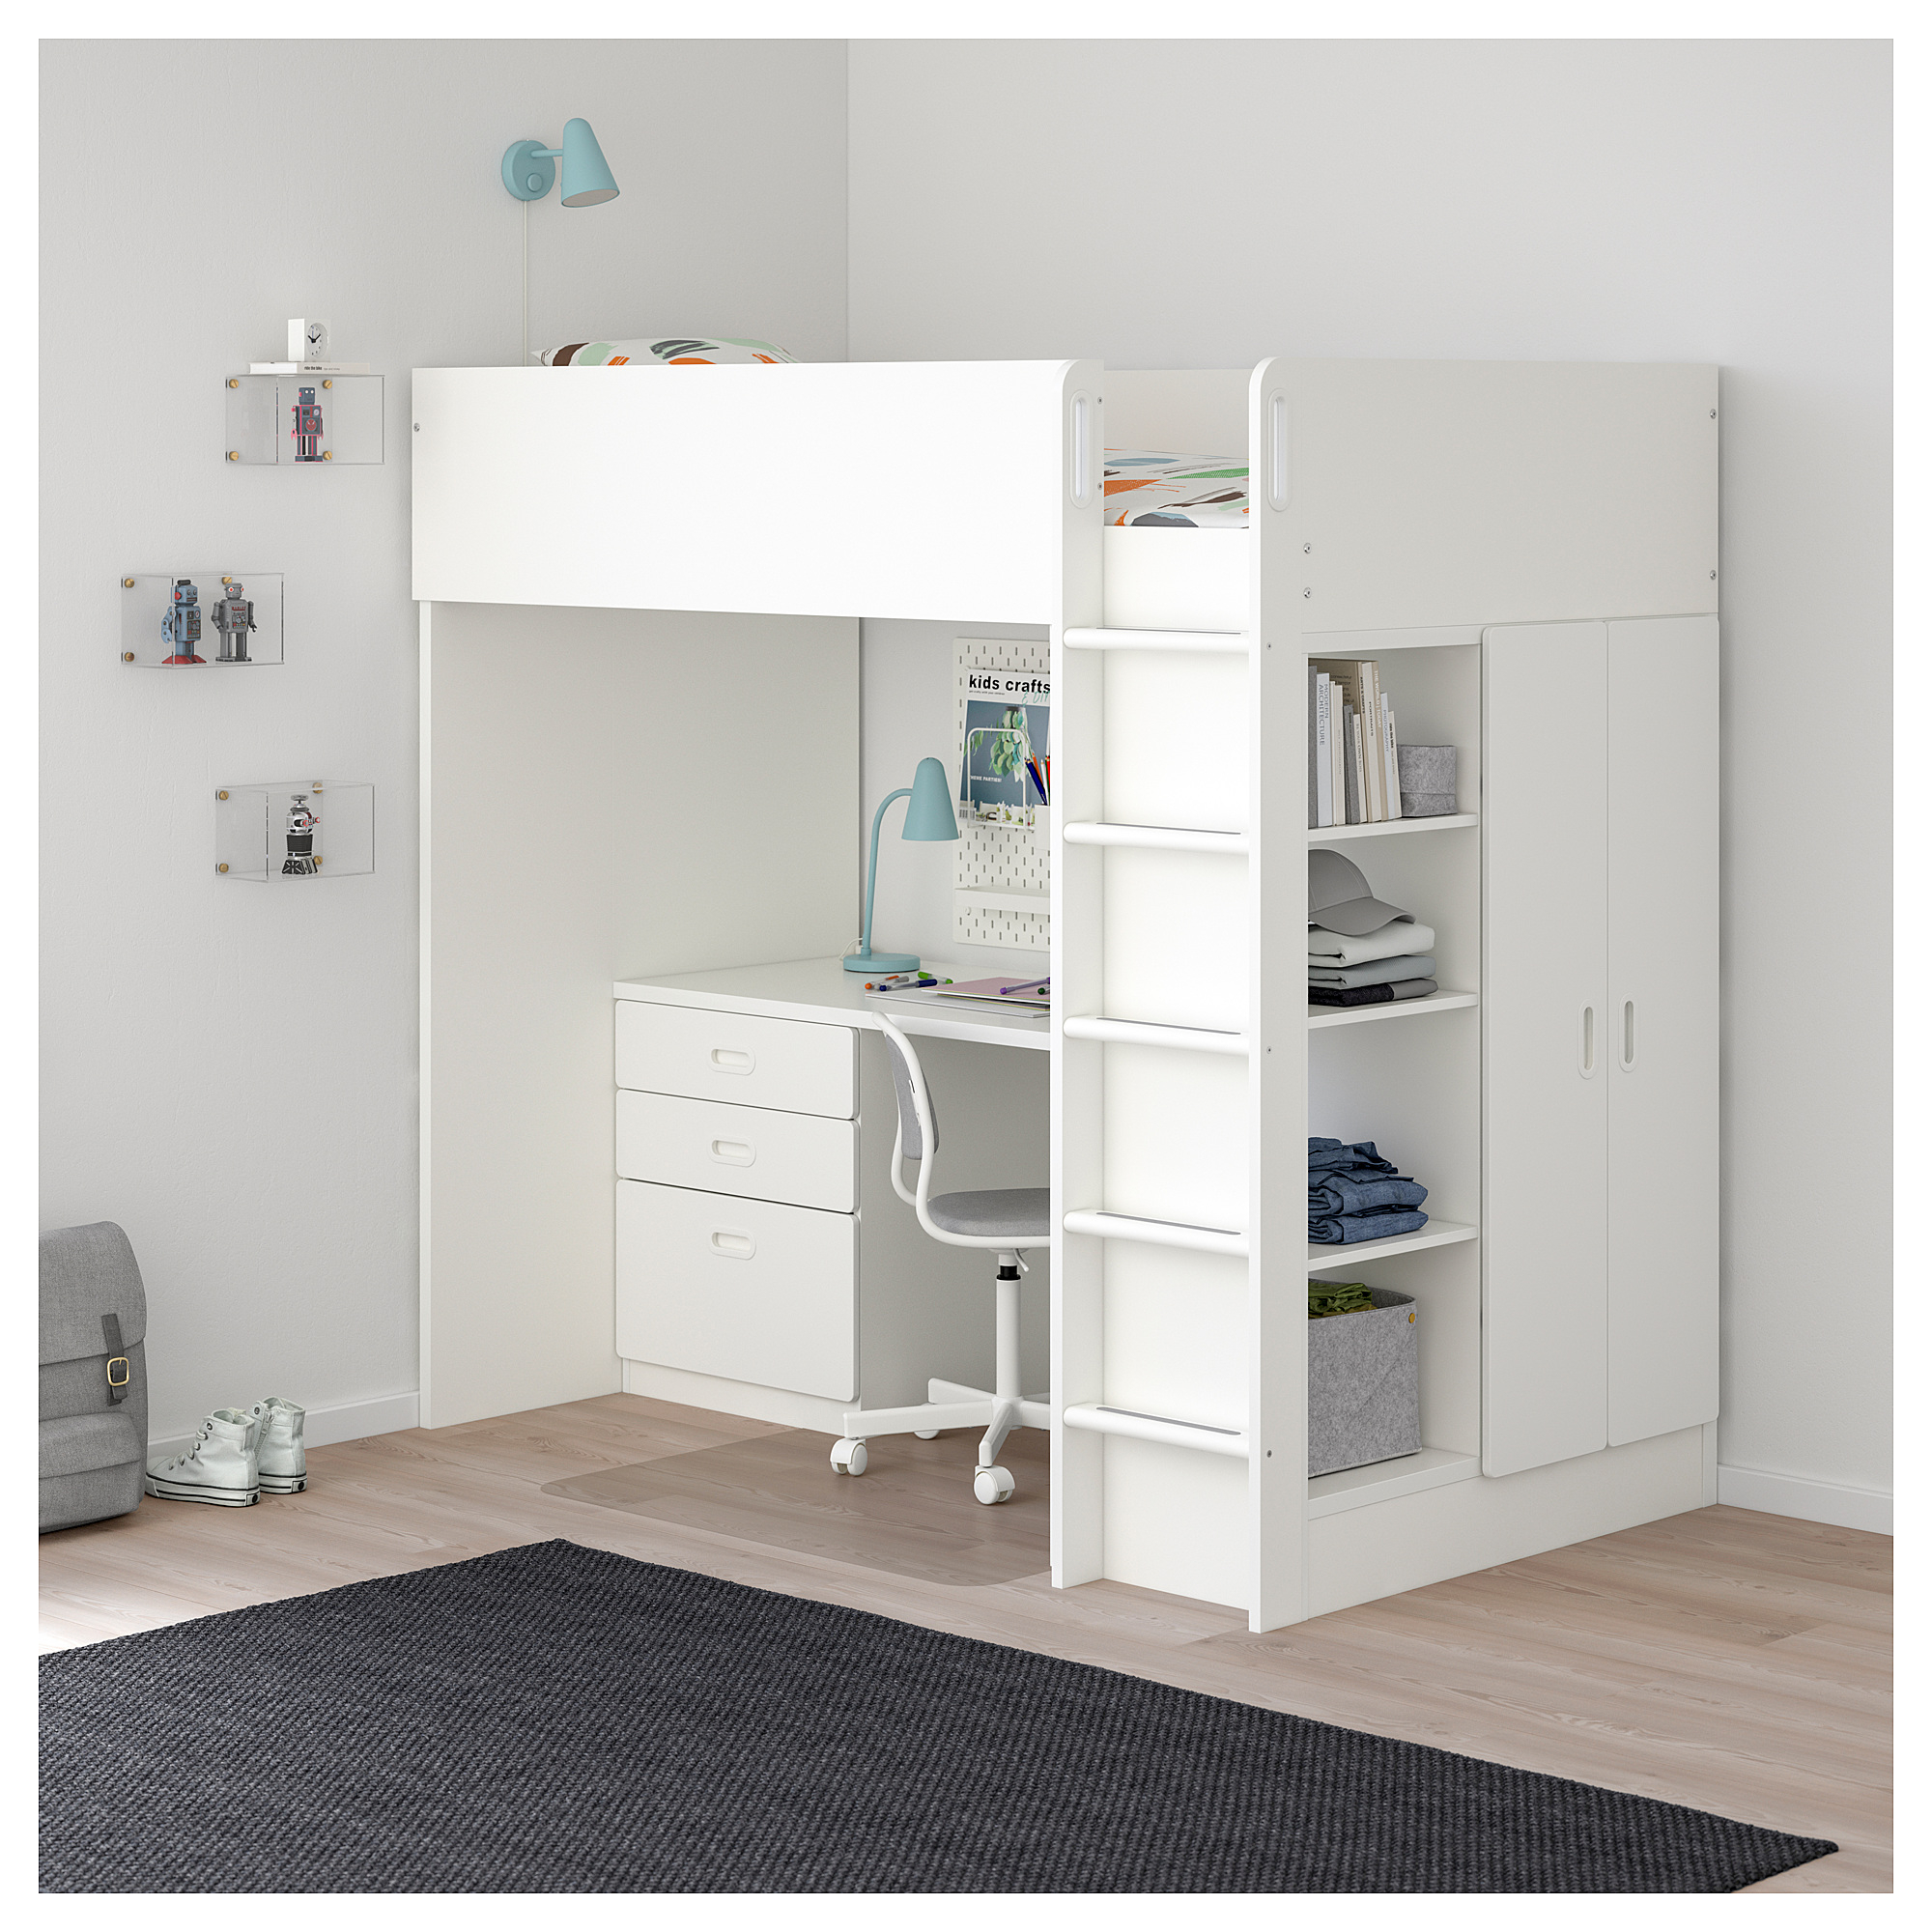 Ikea Loft Beds To Or Not In, Bunk Bed Desk Under Ikea